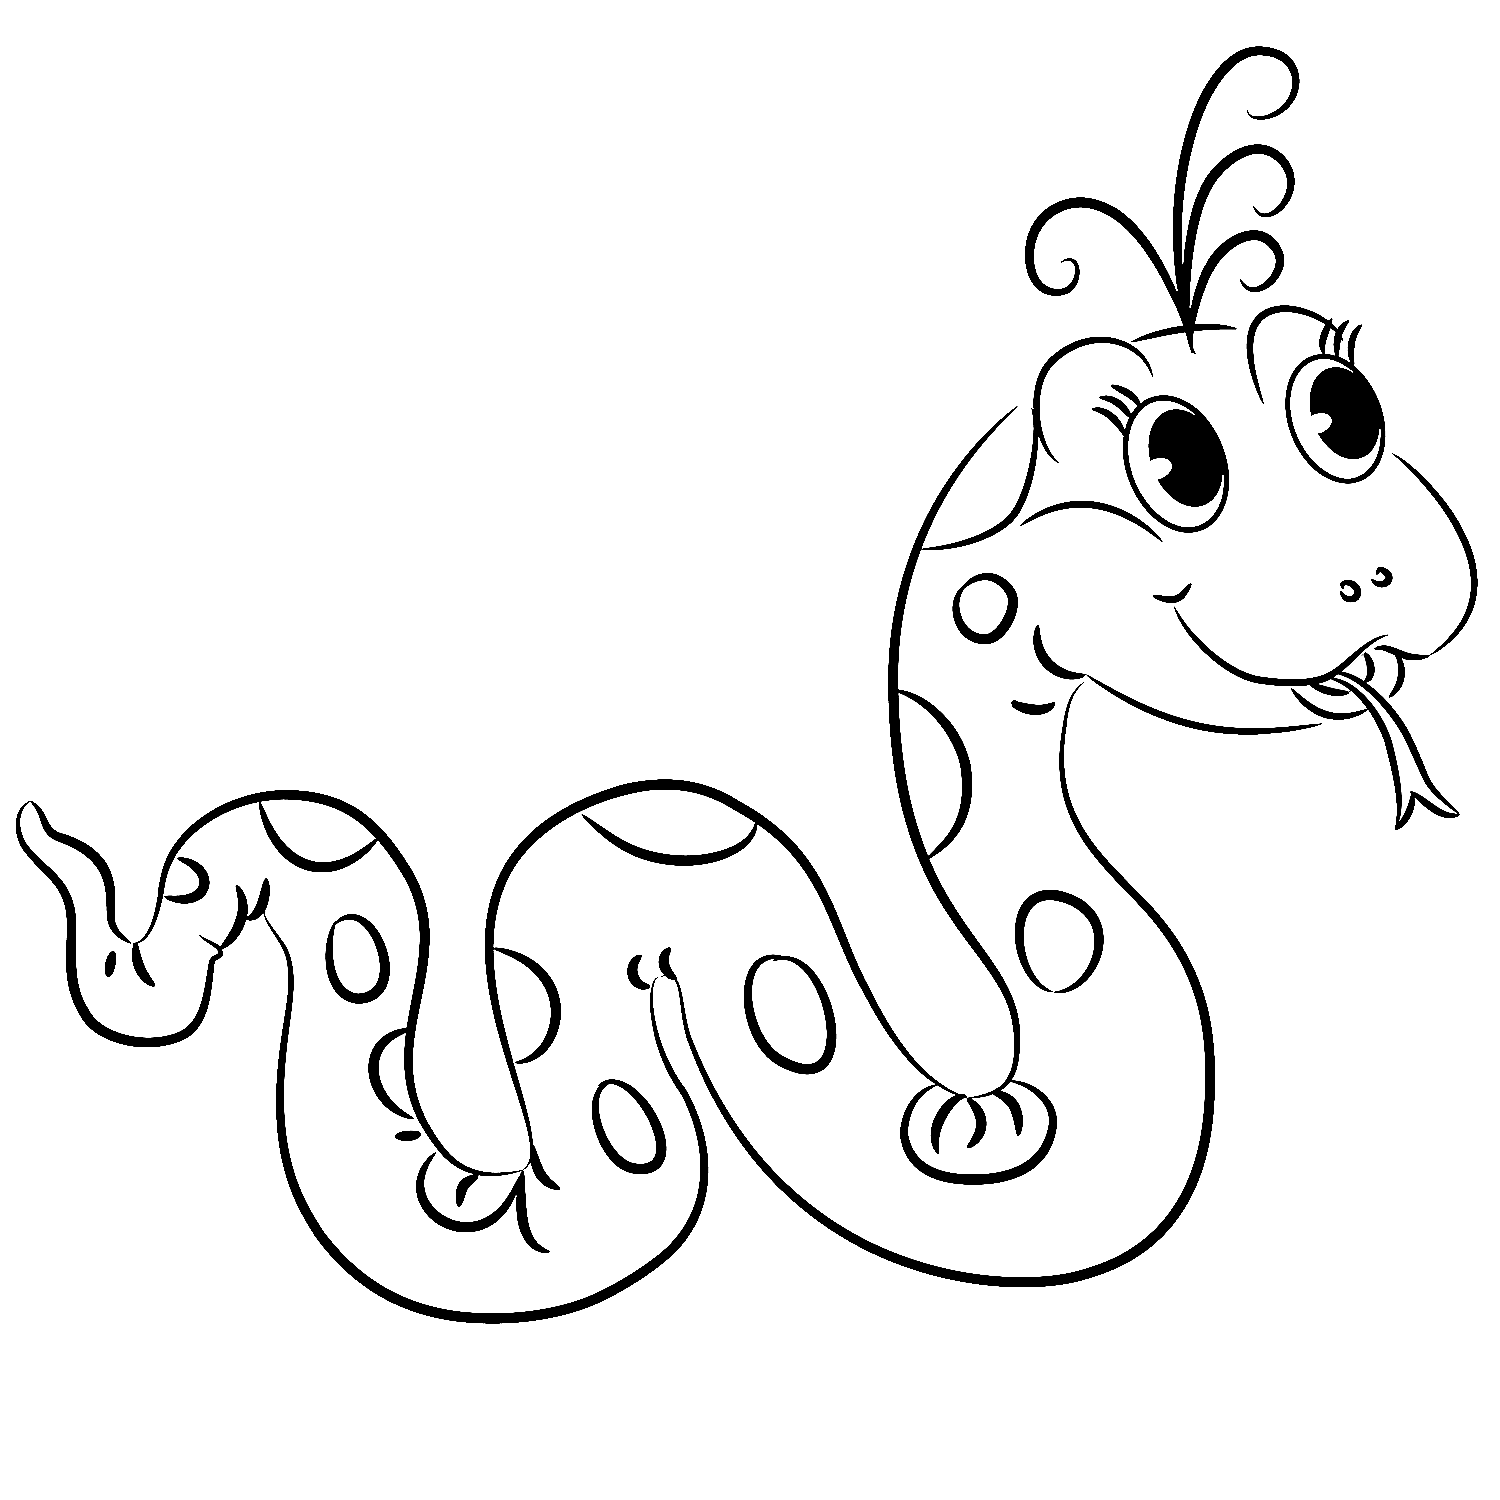 coloring page snake - High Quality Coloring Pages